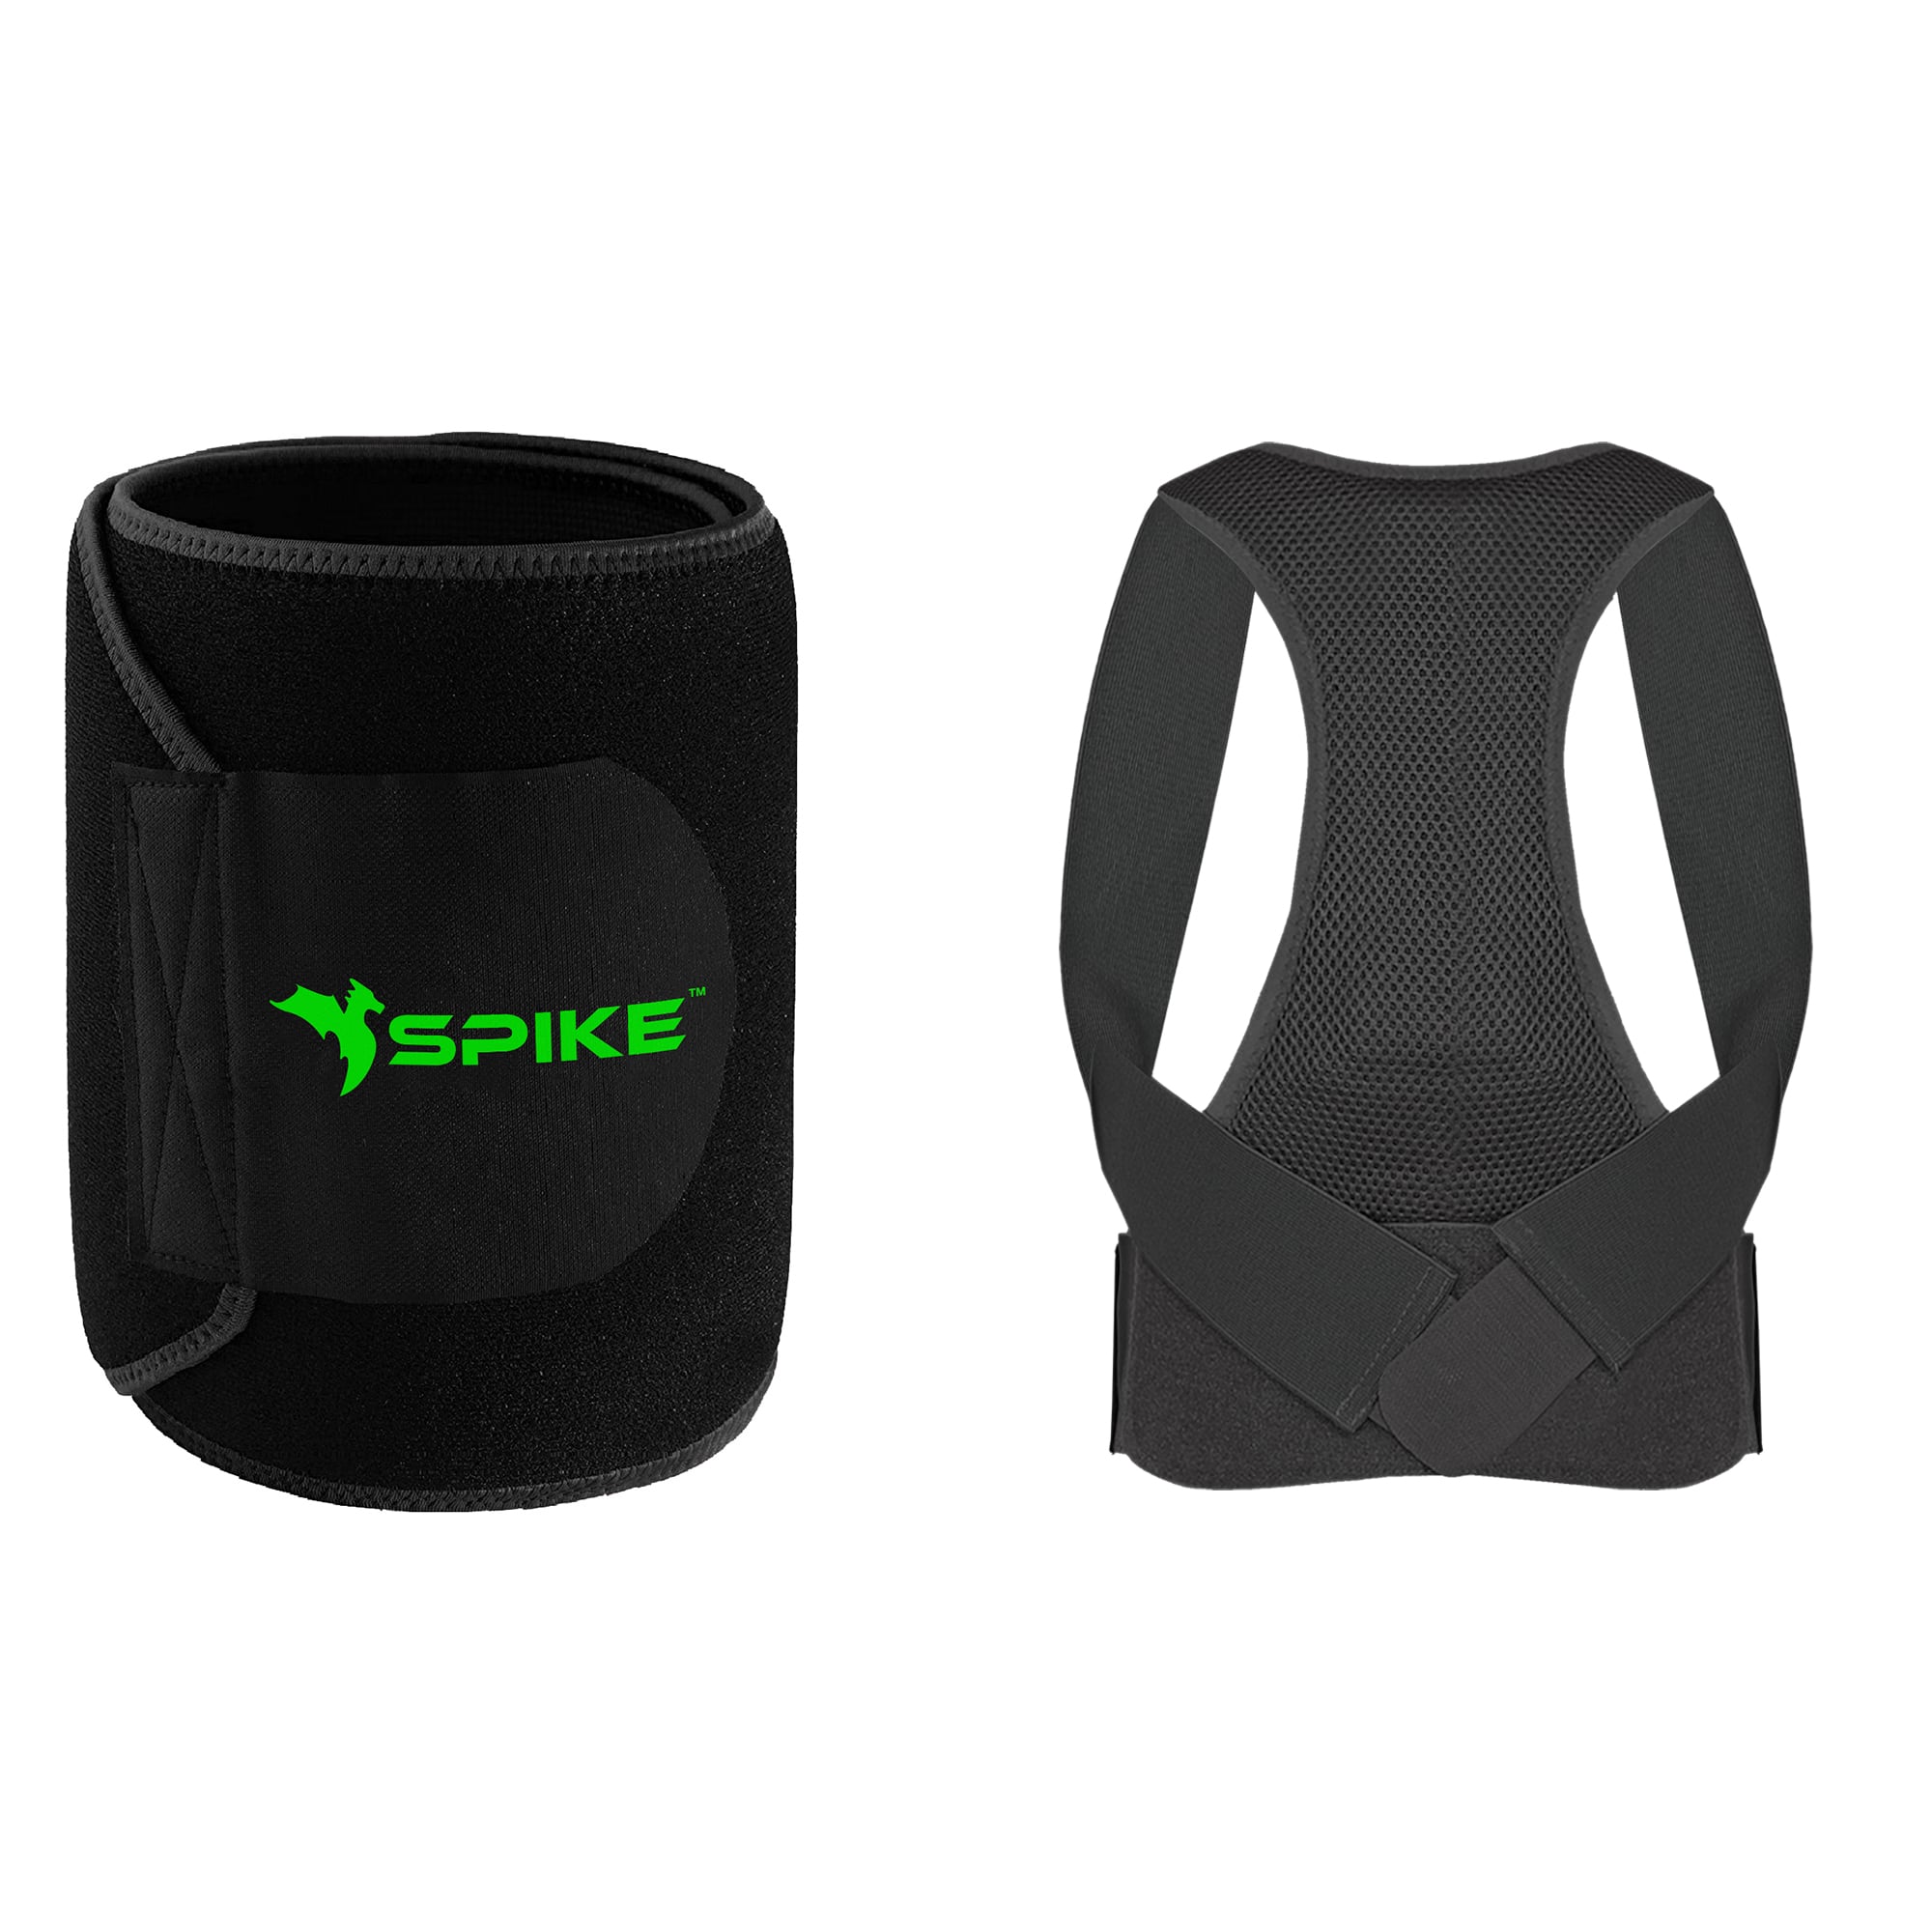 Buy Spike Sweat Slim Belt for Men and Women Online at Low Price -  Spikefitness